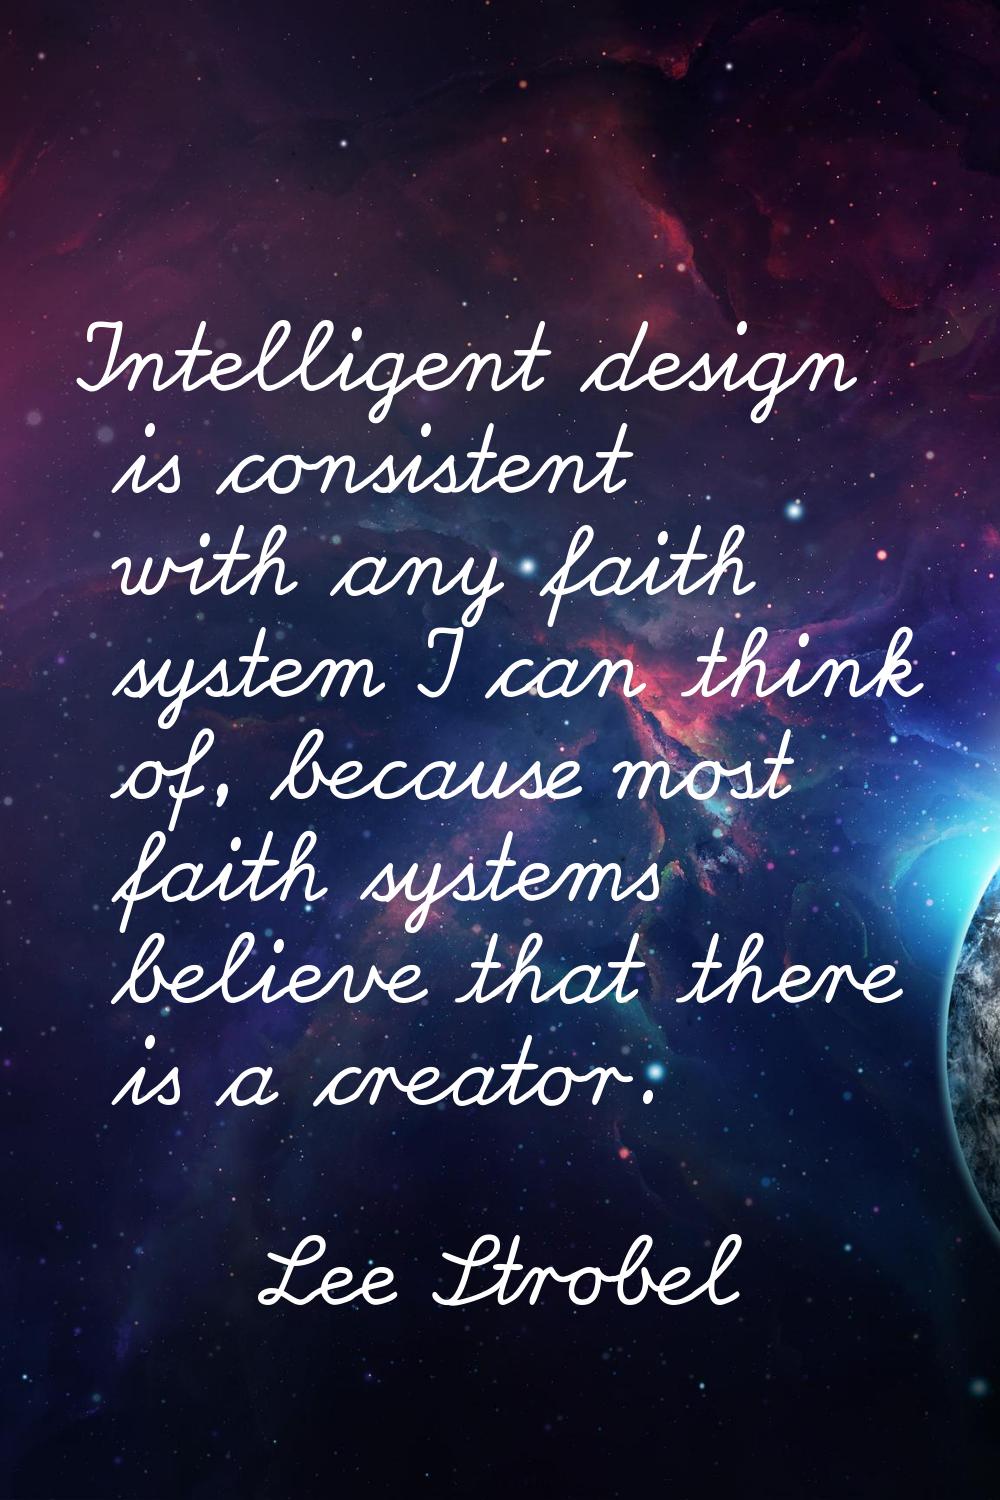 Intelligent design is consistent with any faith system I can think of, because most faith systems b